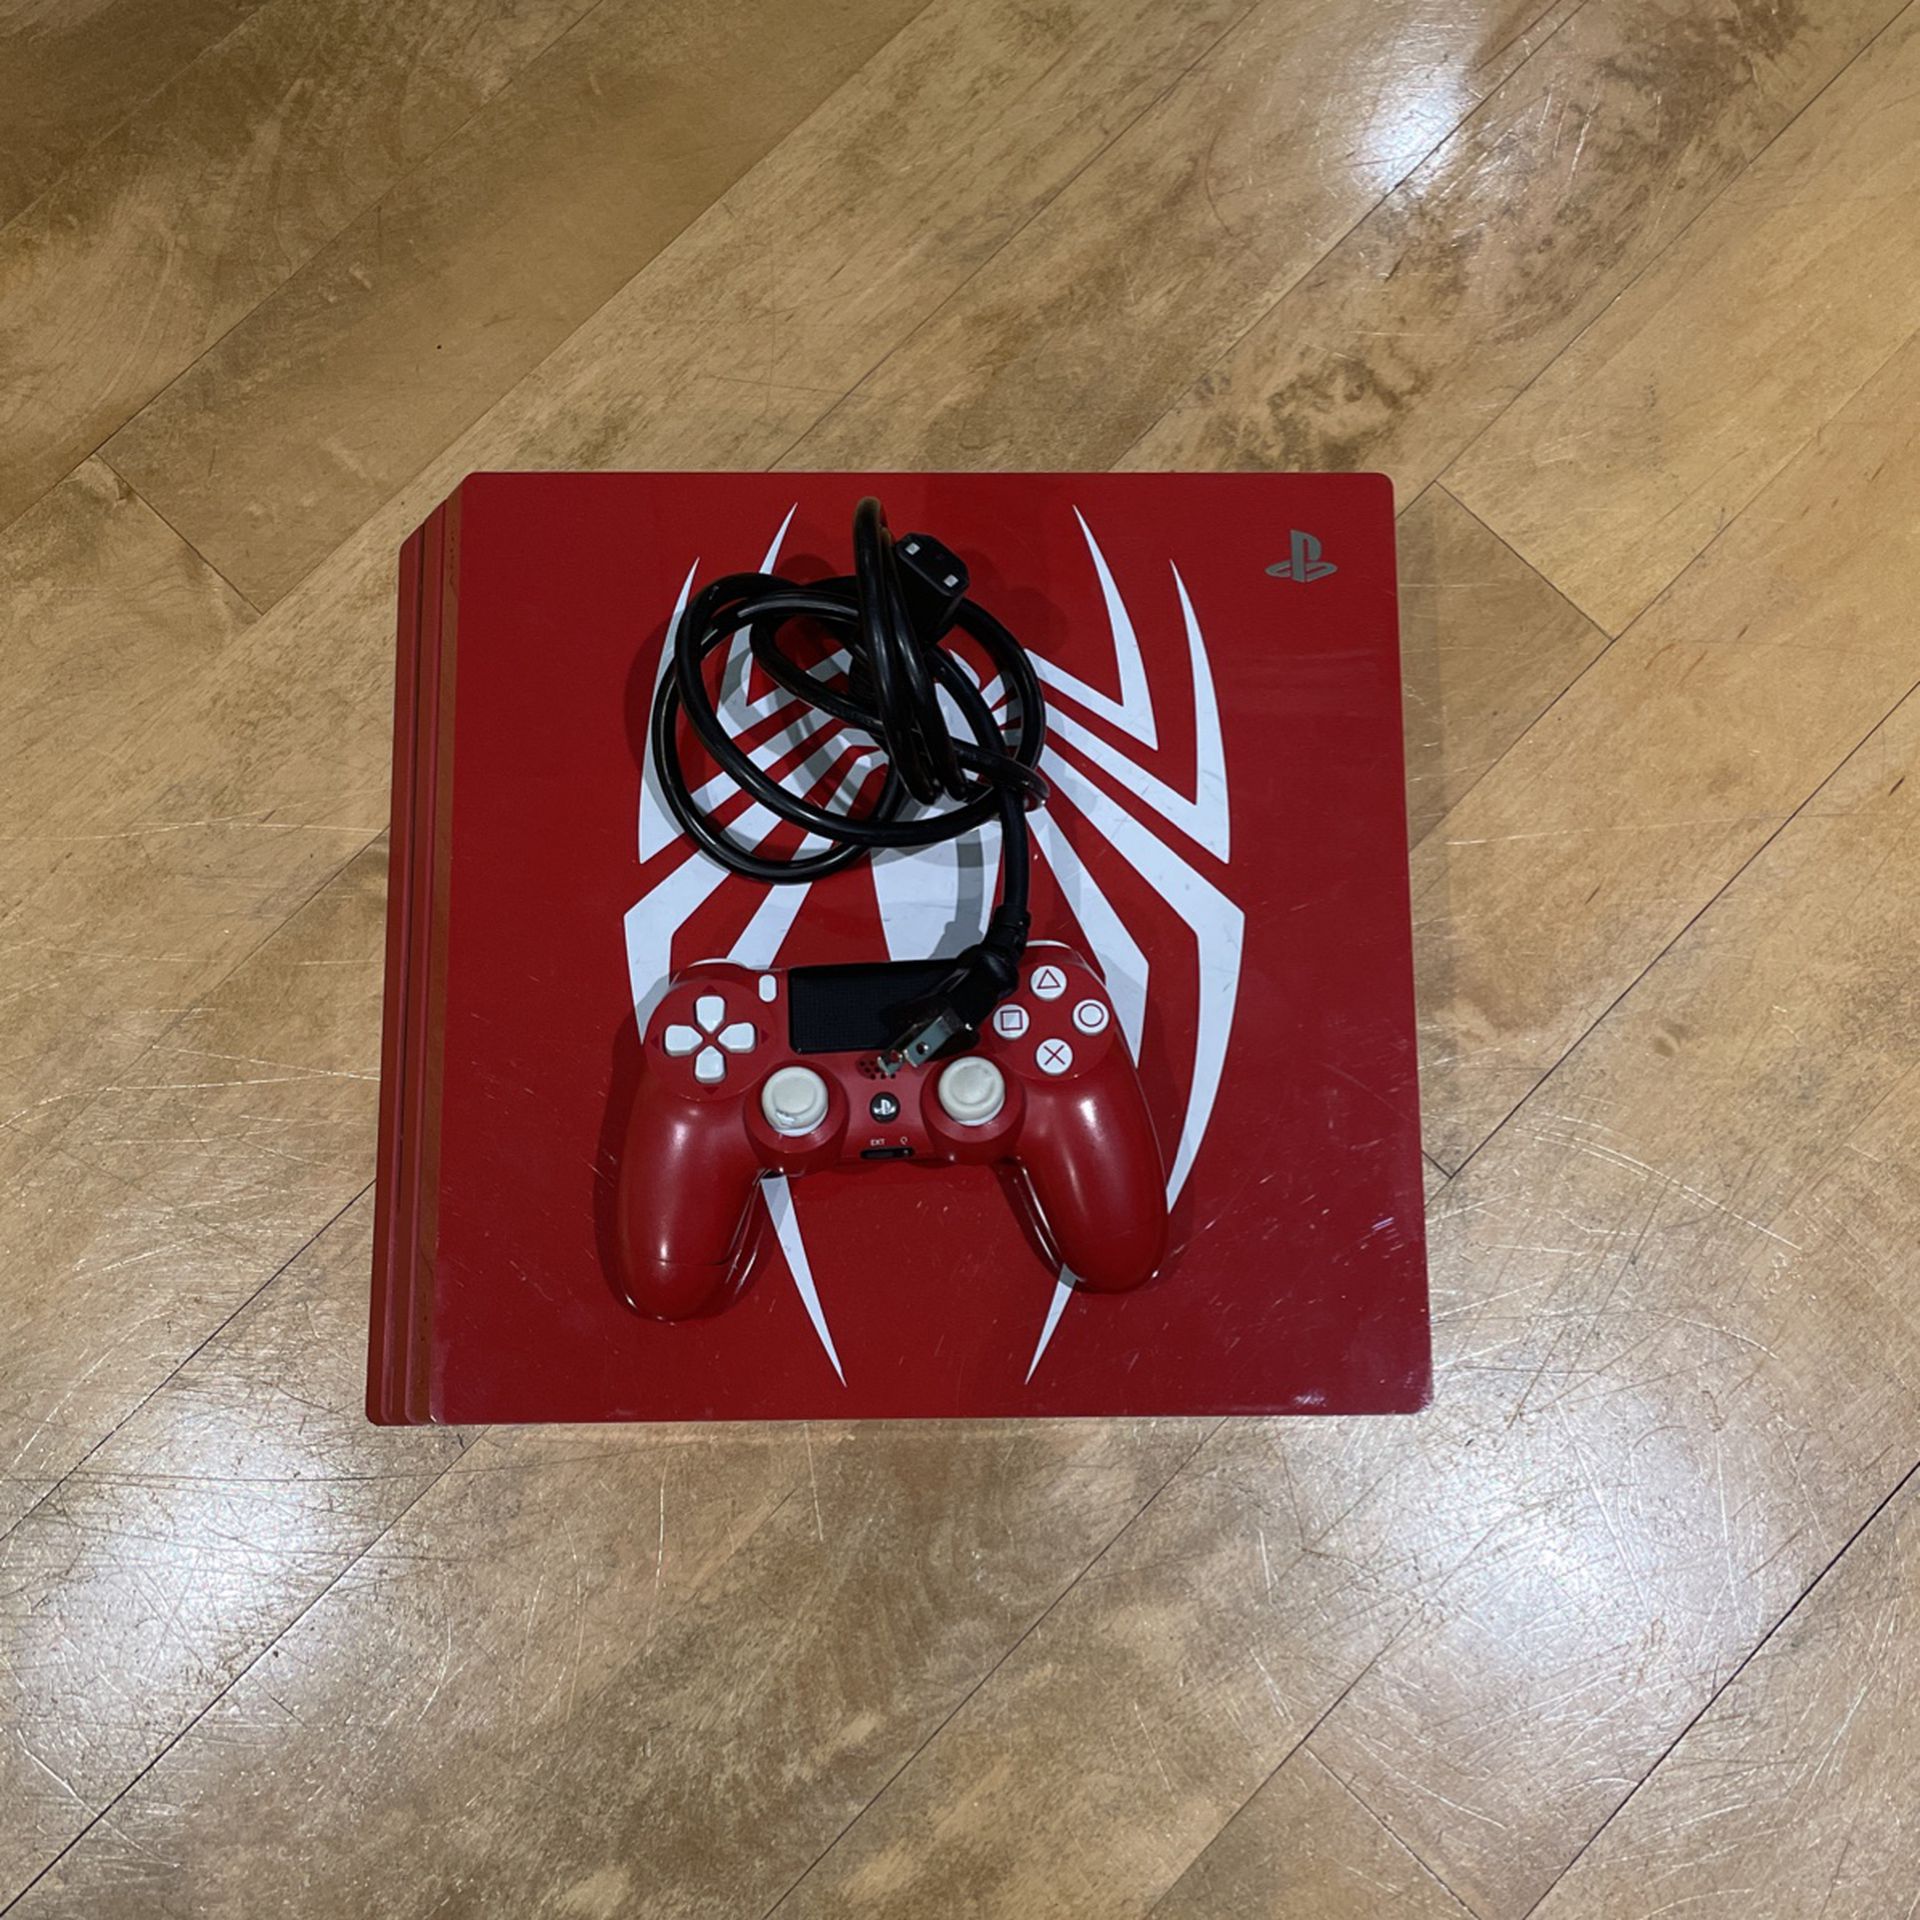 Ps4 Pro Limited Edition SpiderMan